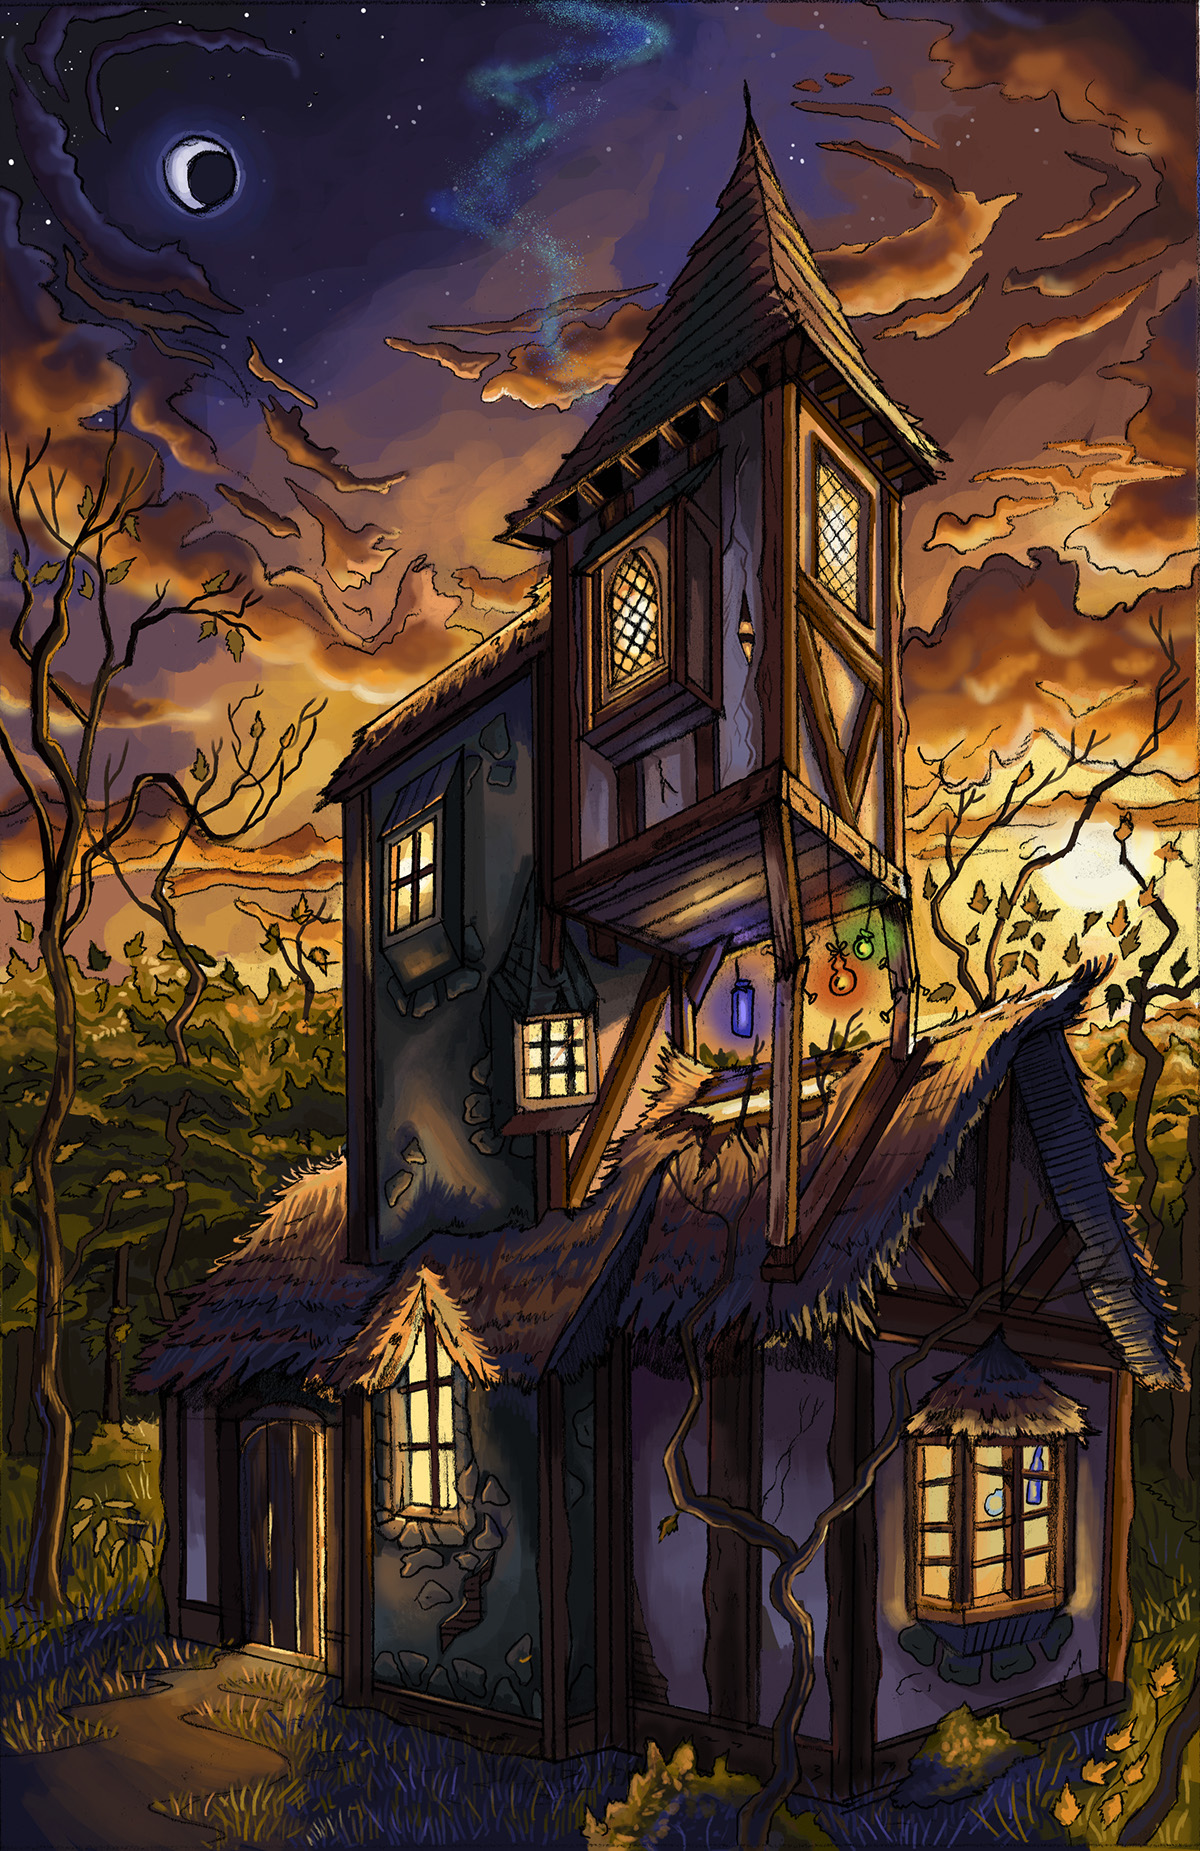 digital illustration 'illustration' background painting concept art environment perspective drawing